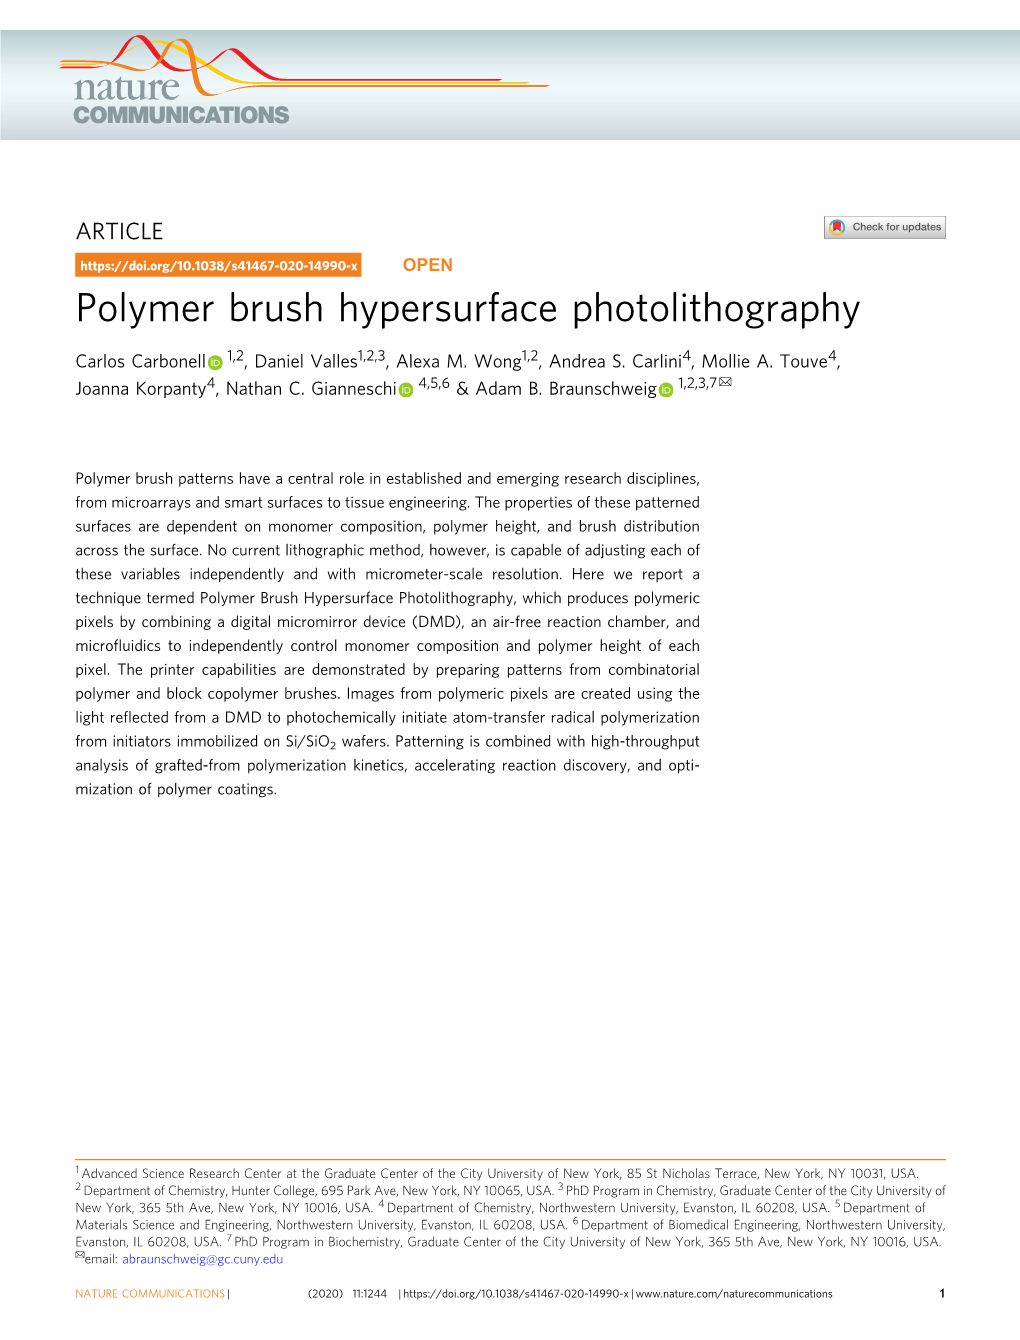 Polymer Brush Hypersurface Photolithography